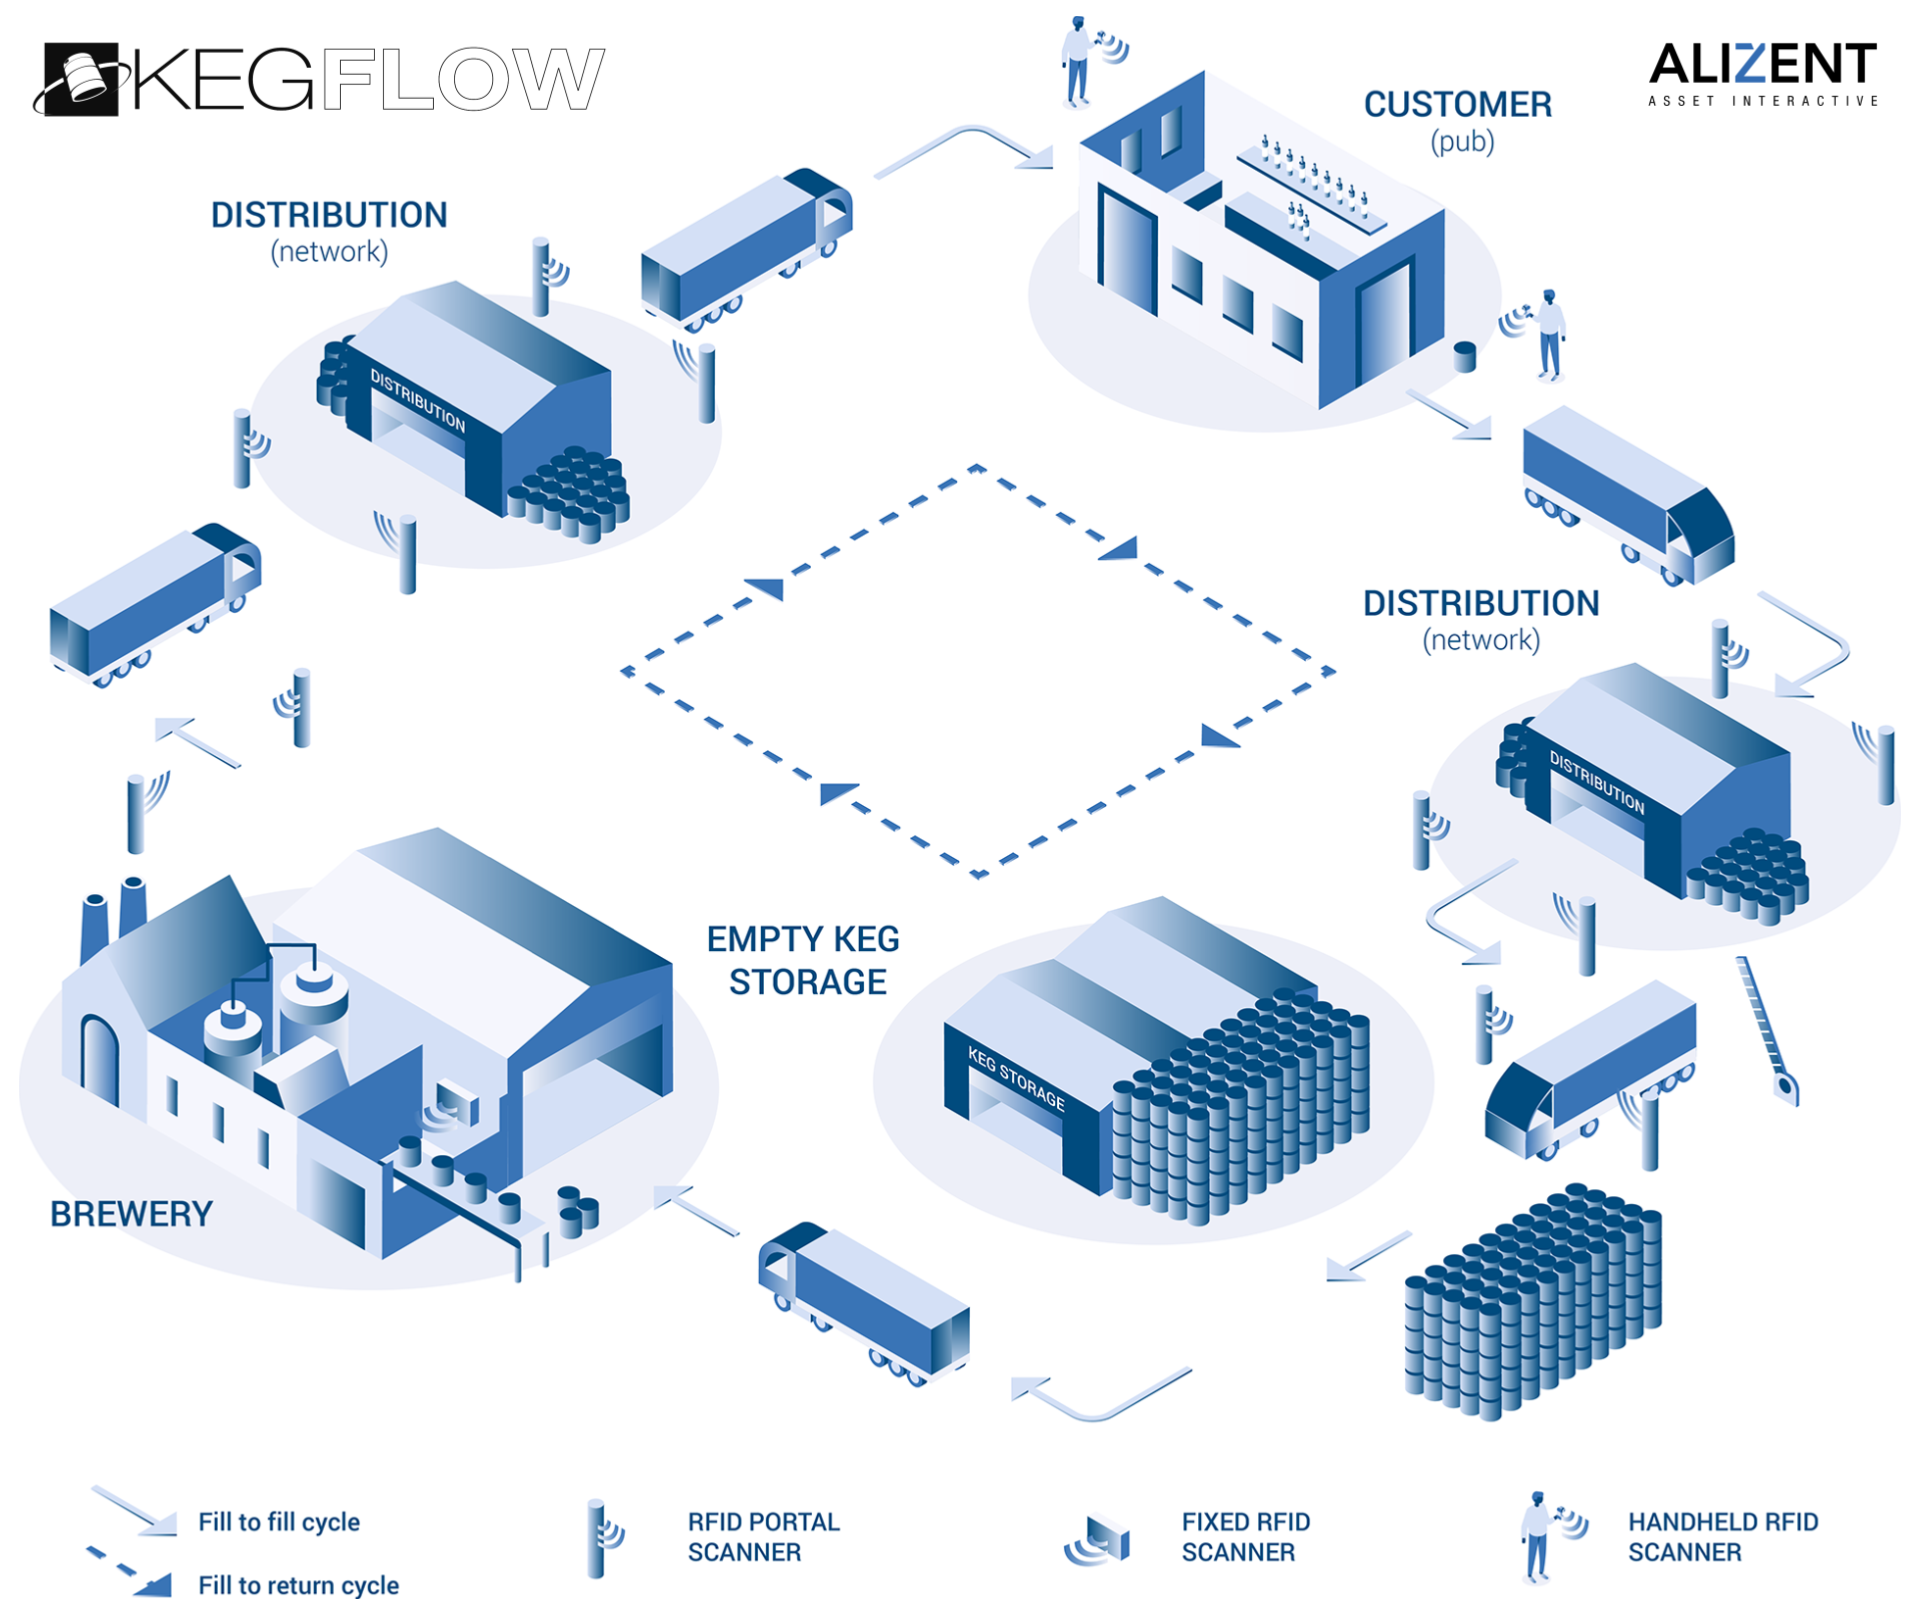 KEGFLOW: Supply Chain Execution System for Beer Industry